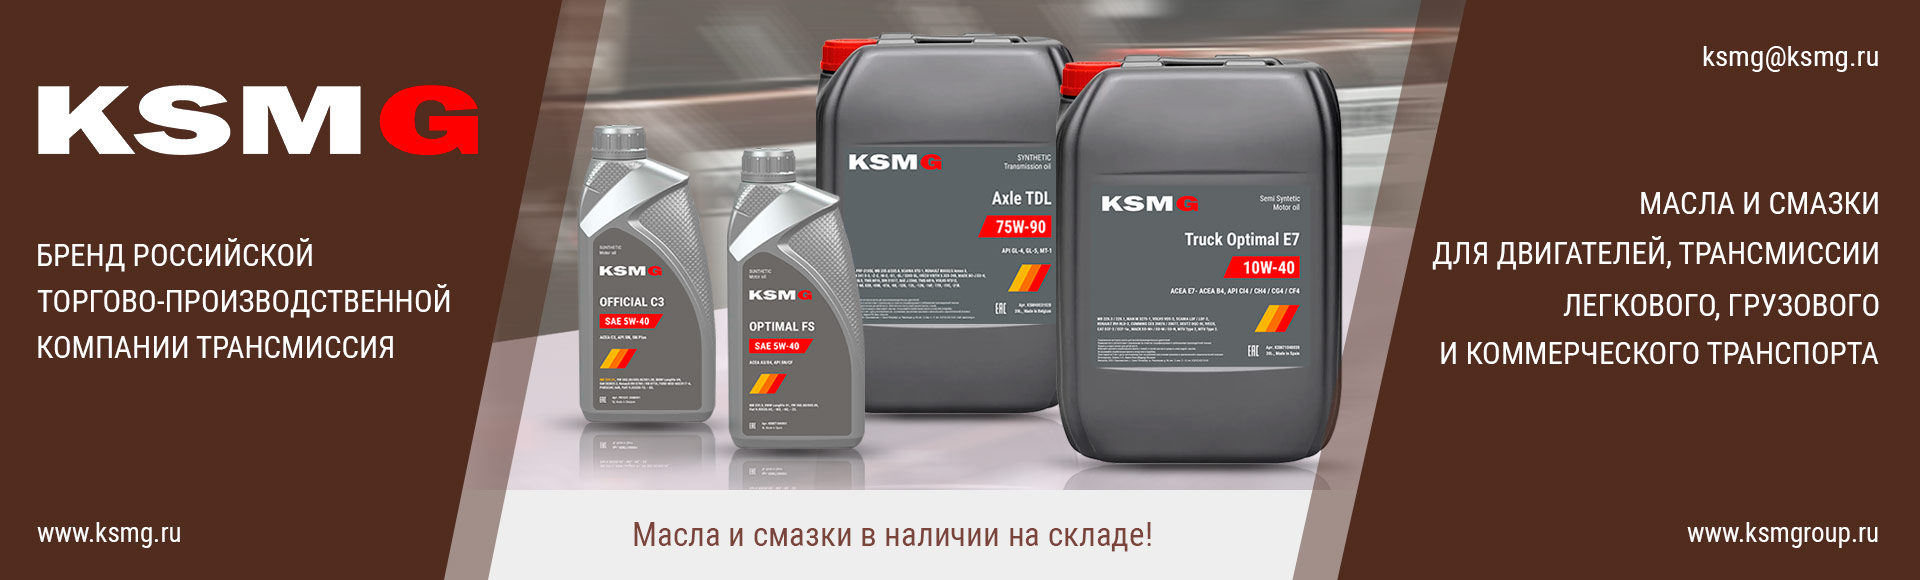 Масла и смазки KSMG